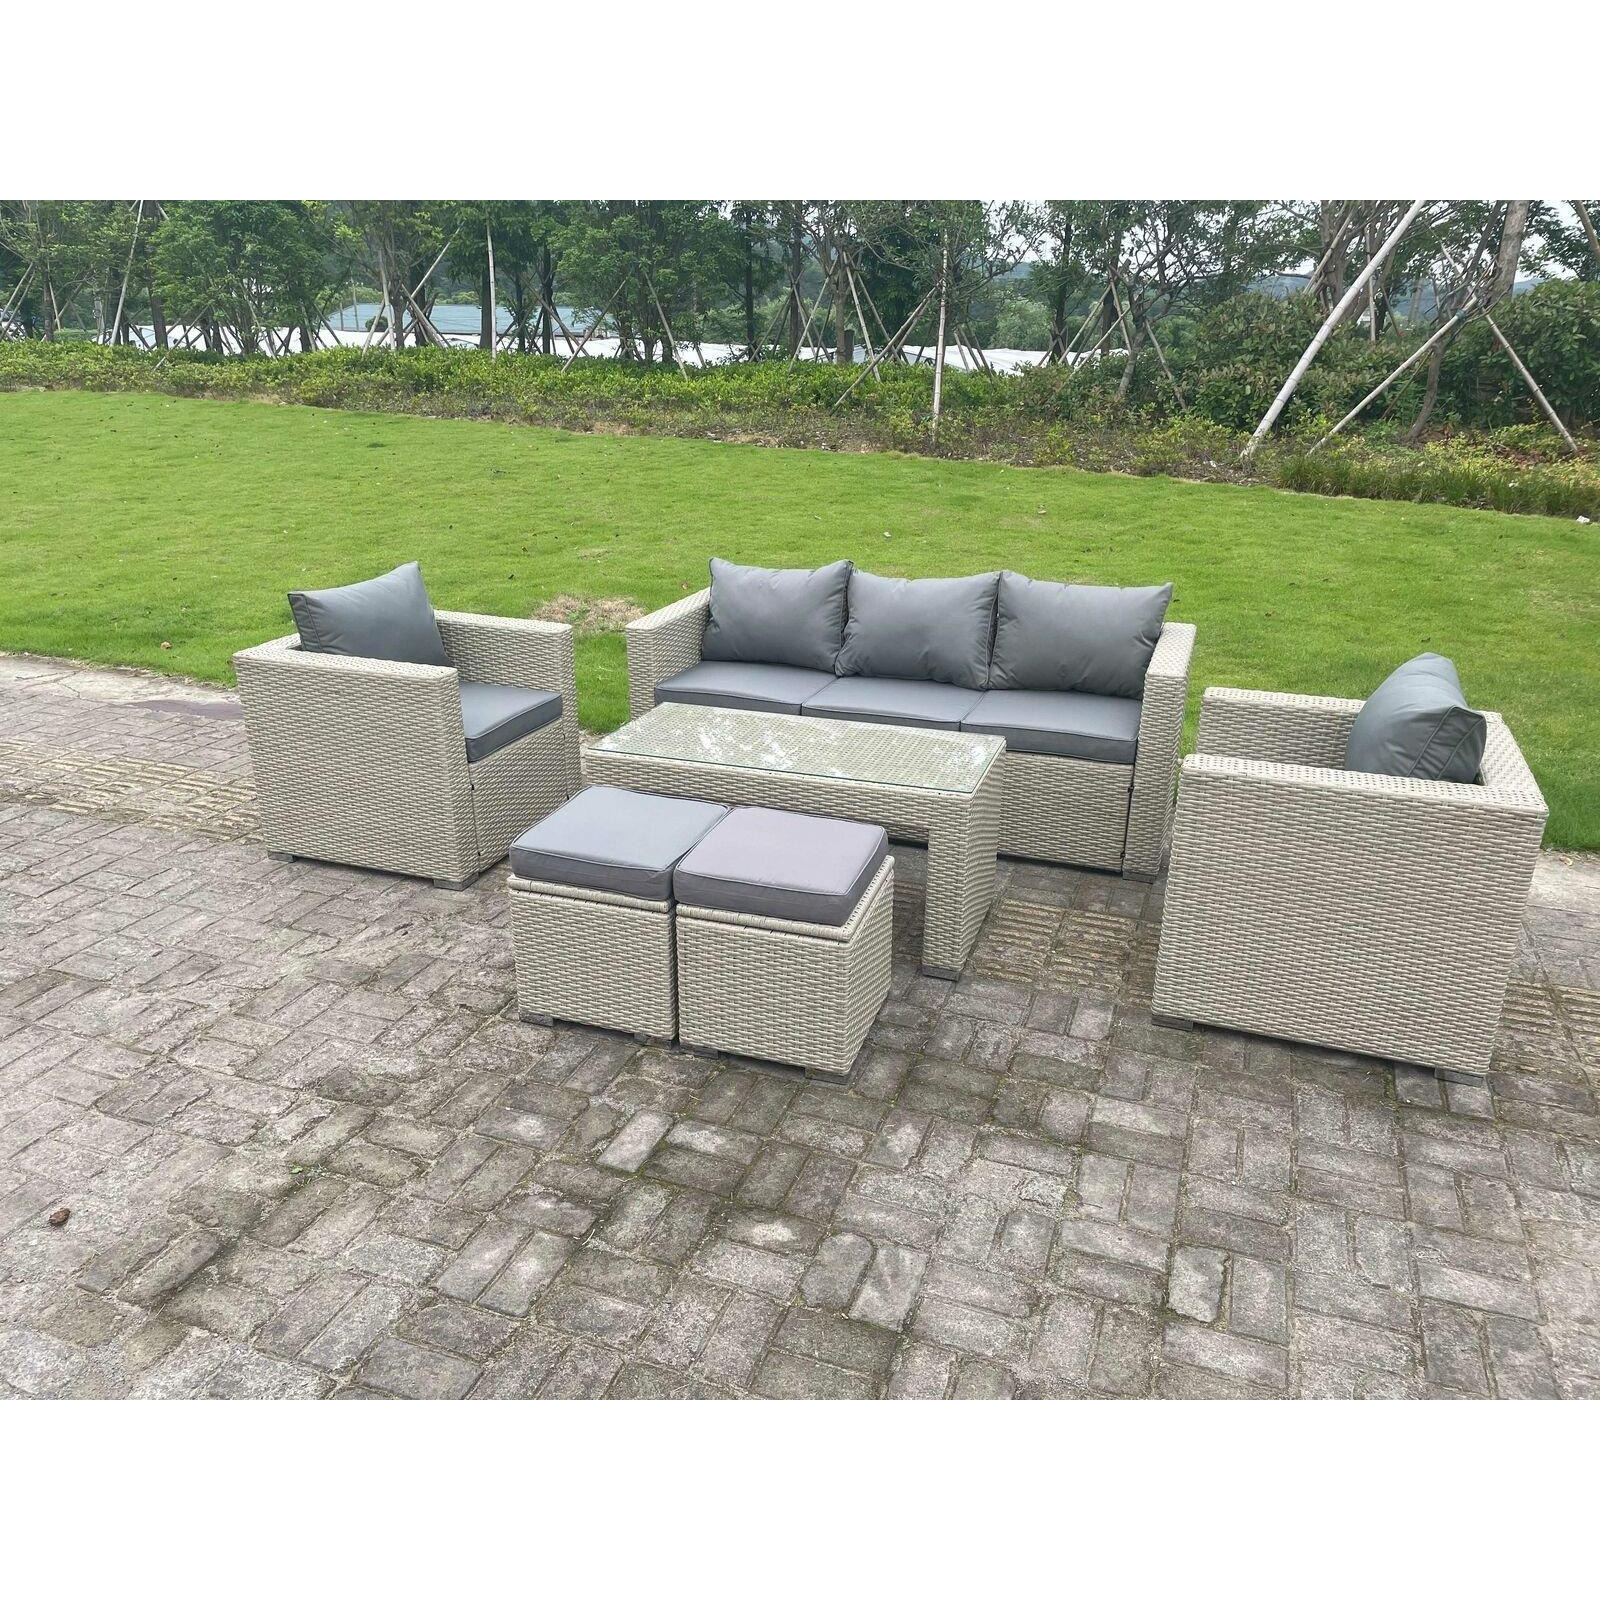 Wicker Rattan Garden Furniture Sofa Sets Outdoor Patio Coffee Table With Stools Light Grey - image 1